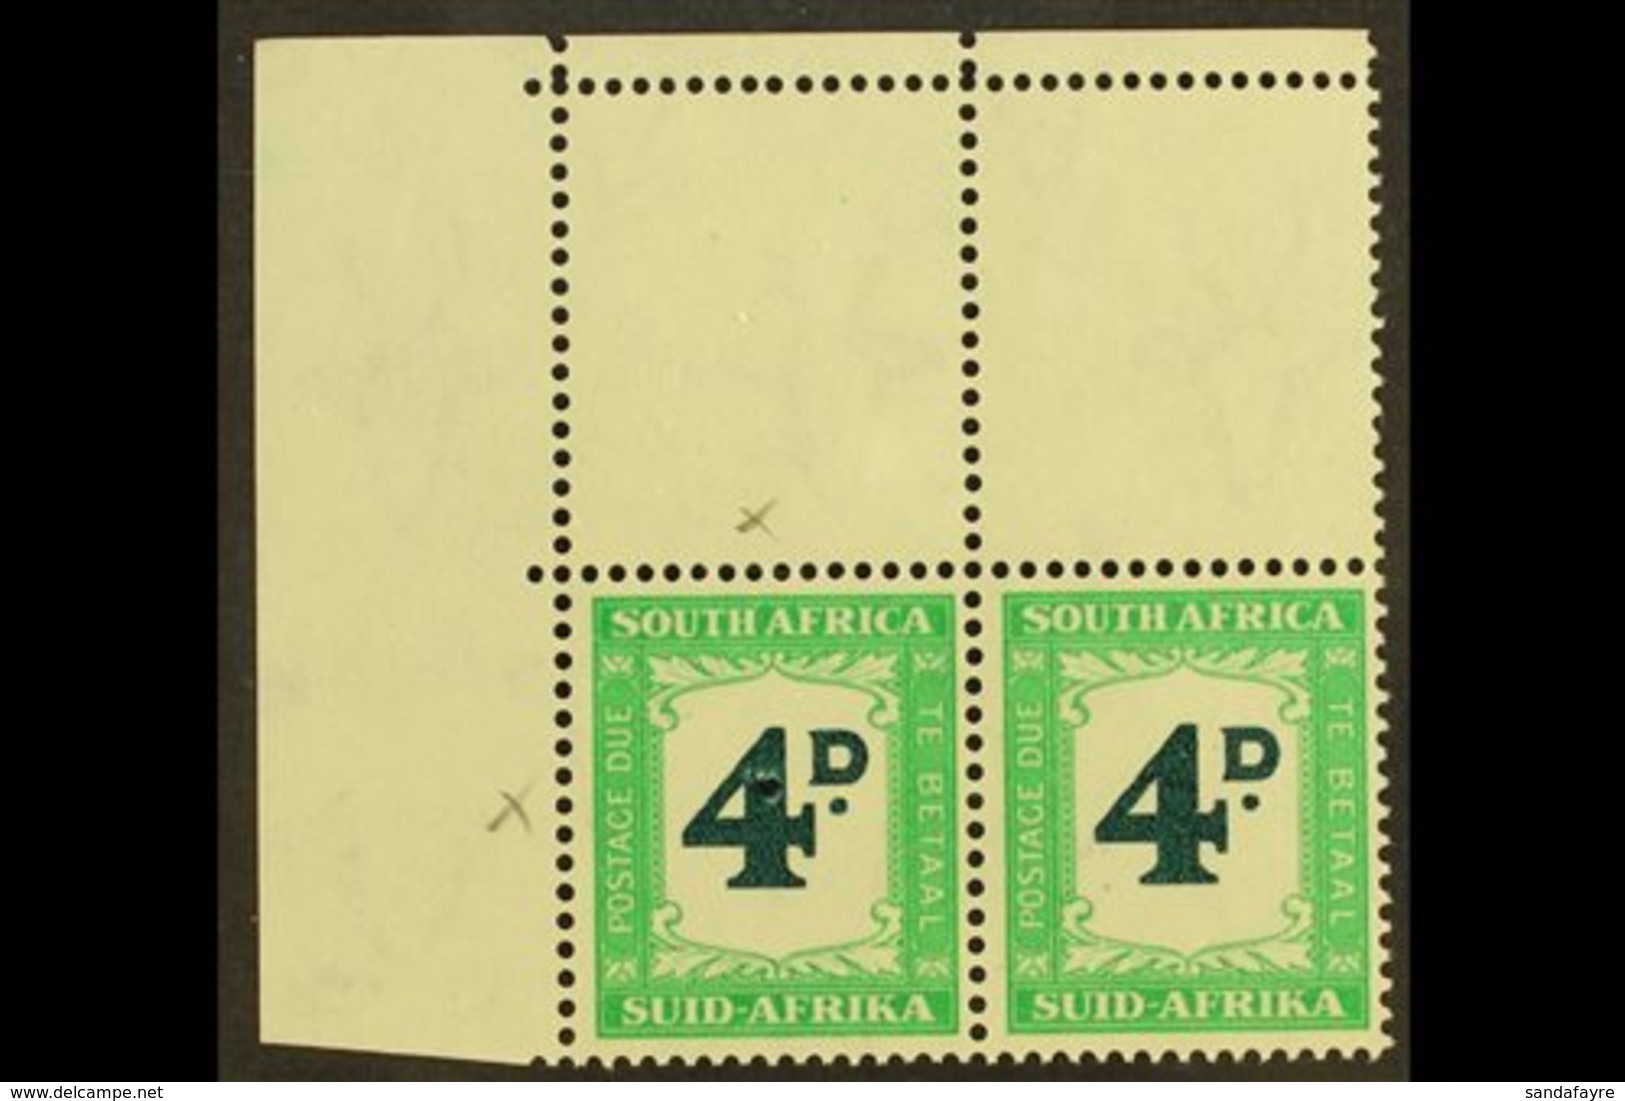 POSTAGE DUES 1950-8 4d Deep Myrtle-green & Emerald, CRUDE RETOUCH VARIETY In Corner Marginal Pair With Normal, SG D42a,  - Unclassified